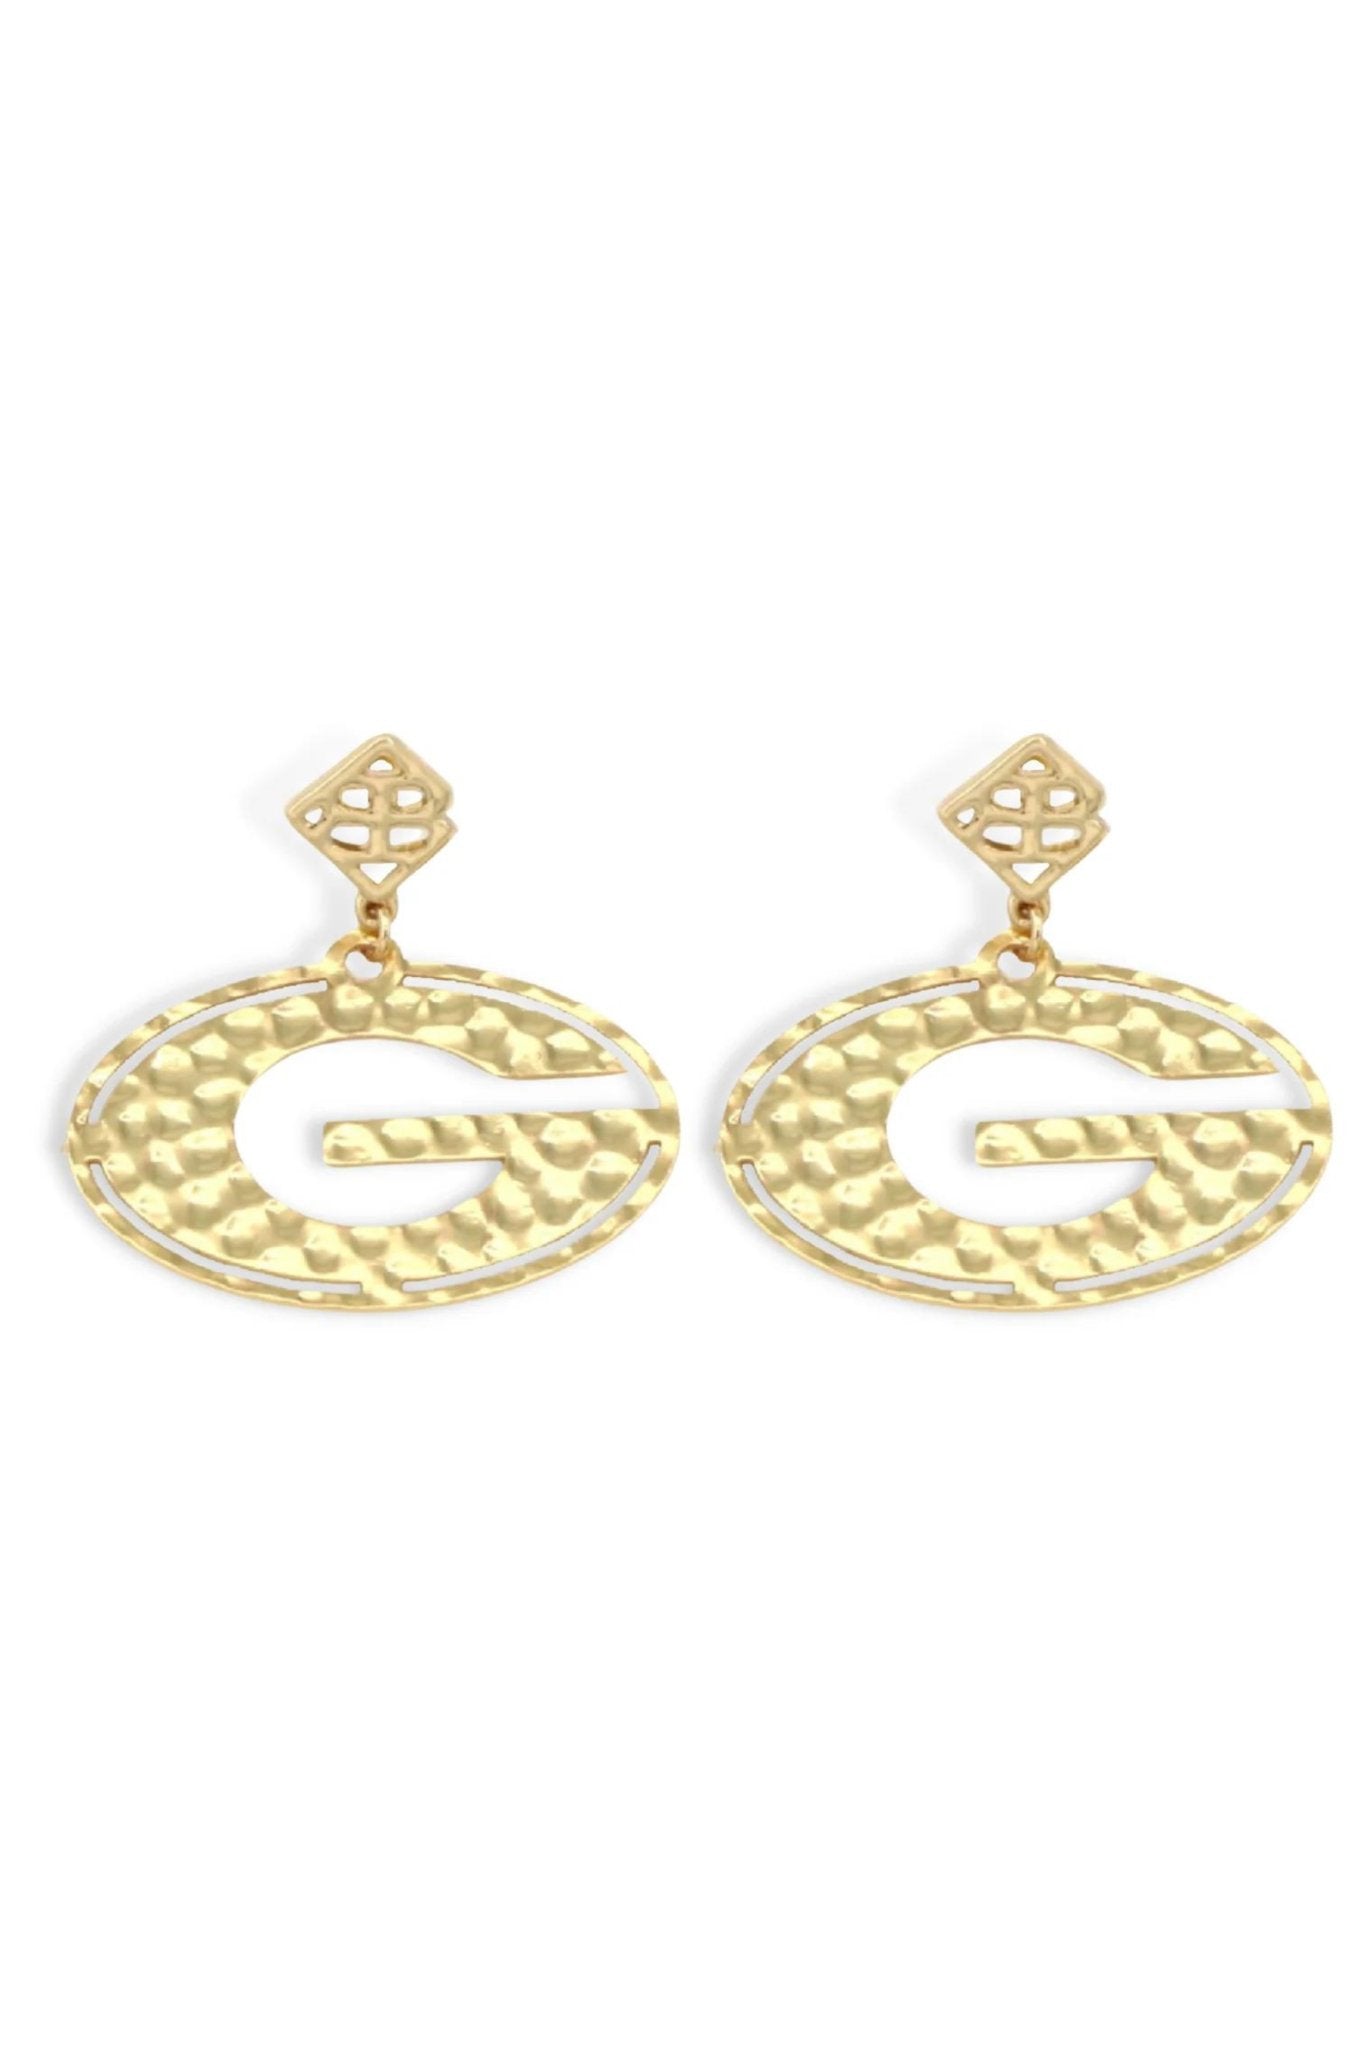 Gold Georgia Power G Earrings - Brianna Cannon - Color Game